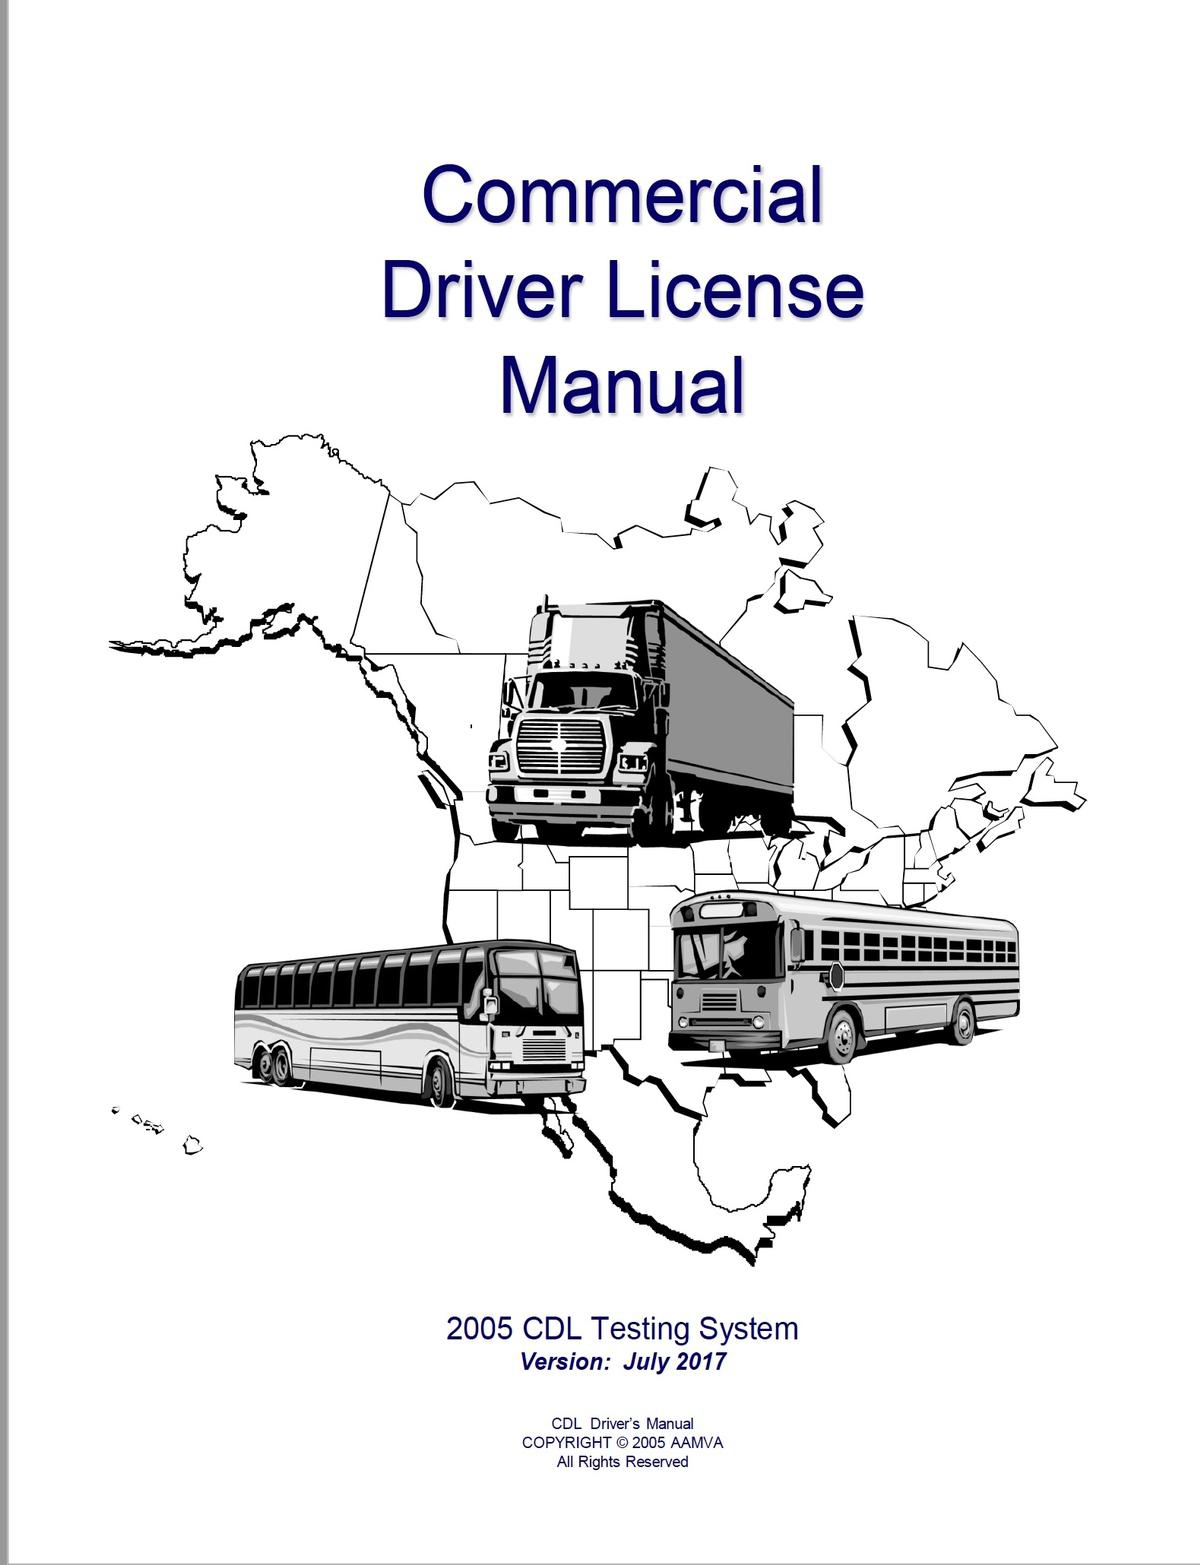 Oklahoma Commercial Driver License Manual The Girards Law Firm